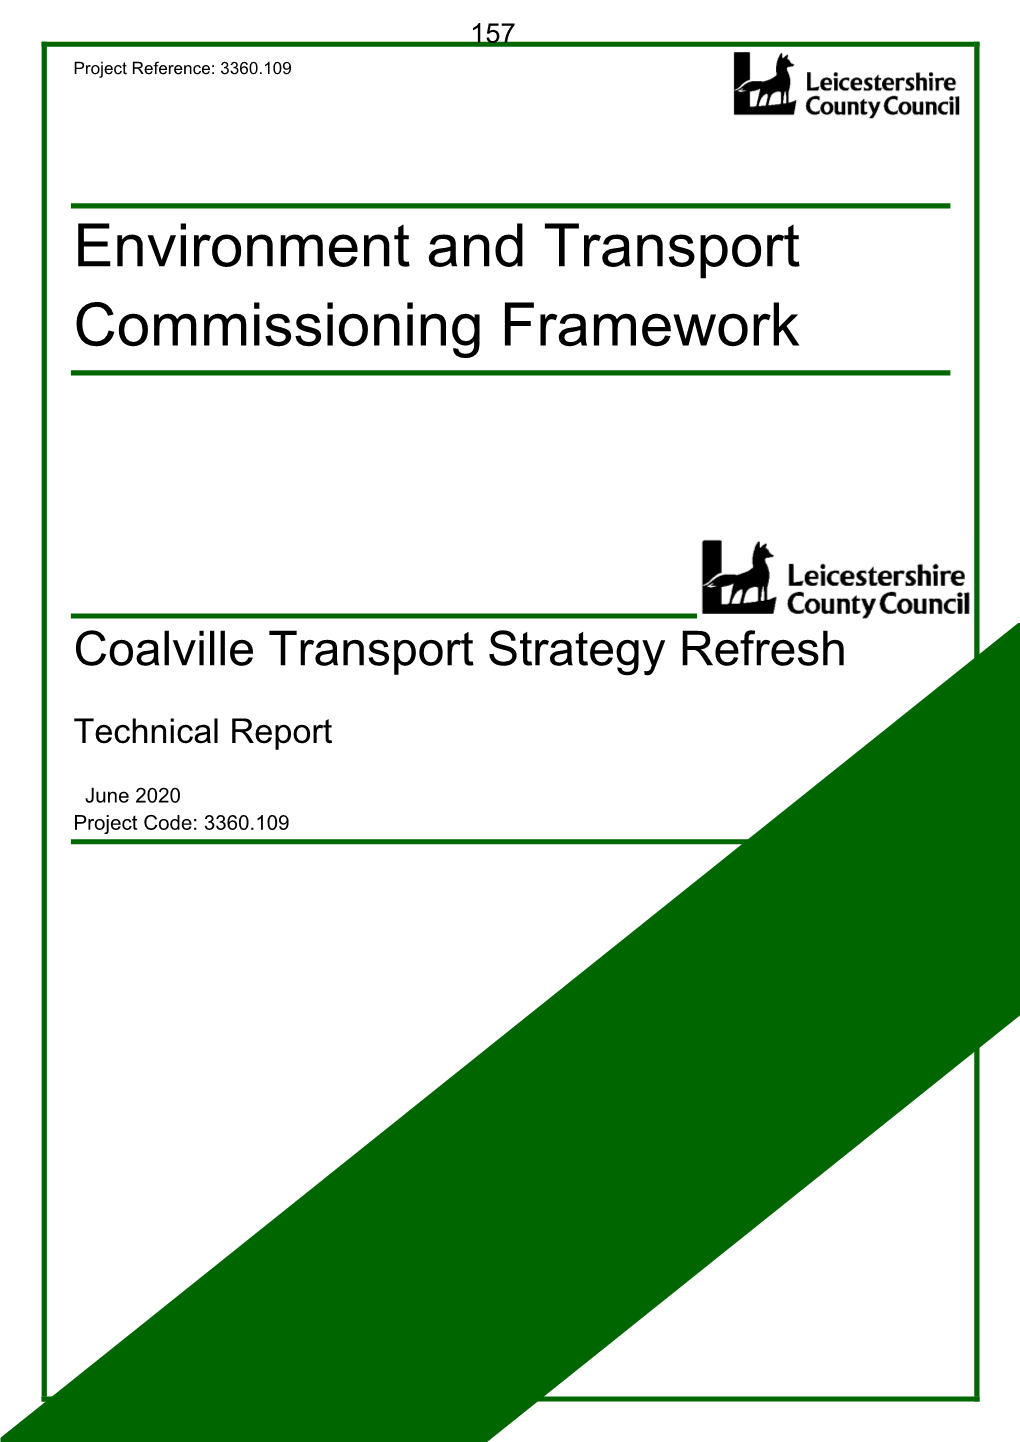 Environment and Transport Commissioning Framework